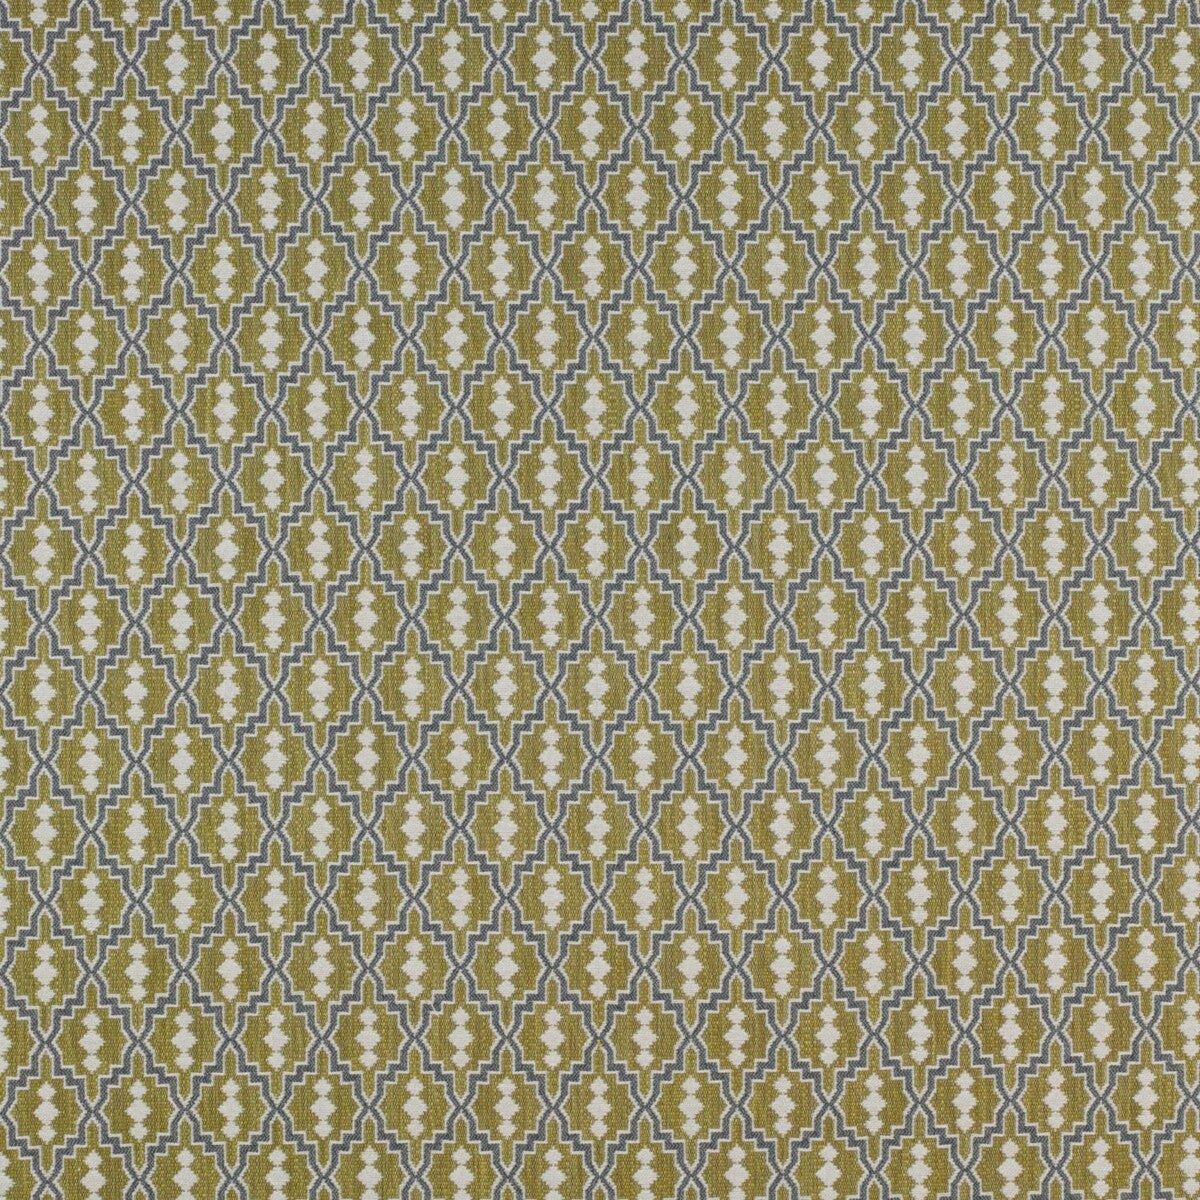 Aztec fabric in verde lima color - pattern GDT5152.004.0 - by Gaston y Daniela in the Gaston Uptown collection